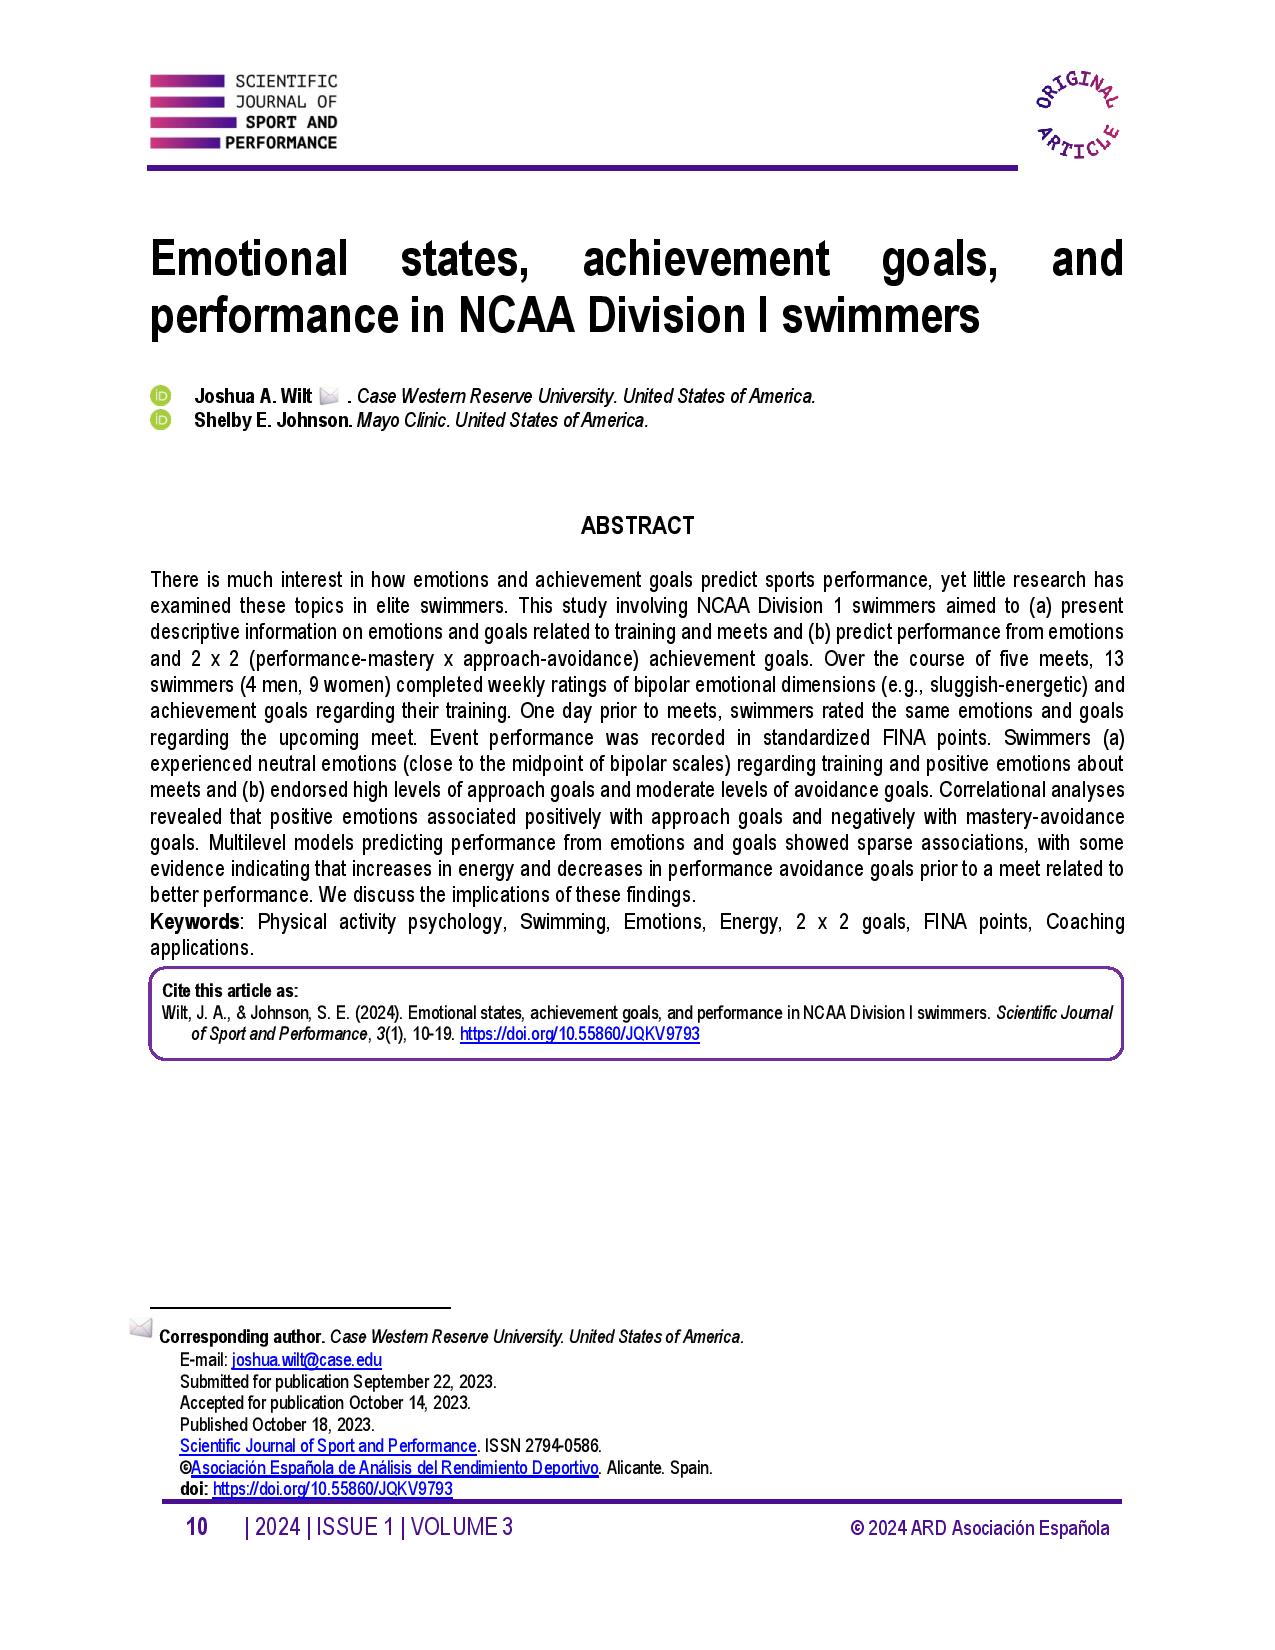 Emotional states, achievement goals, and performance in NCAA Division I swimmers